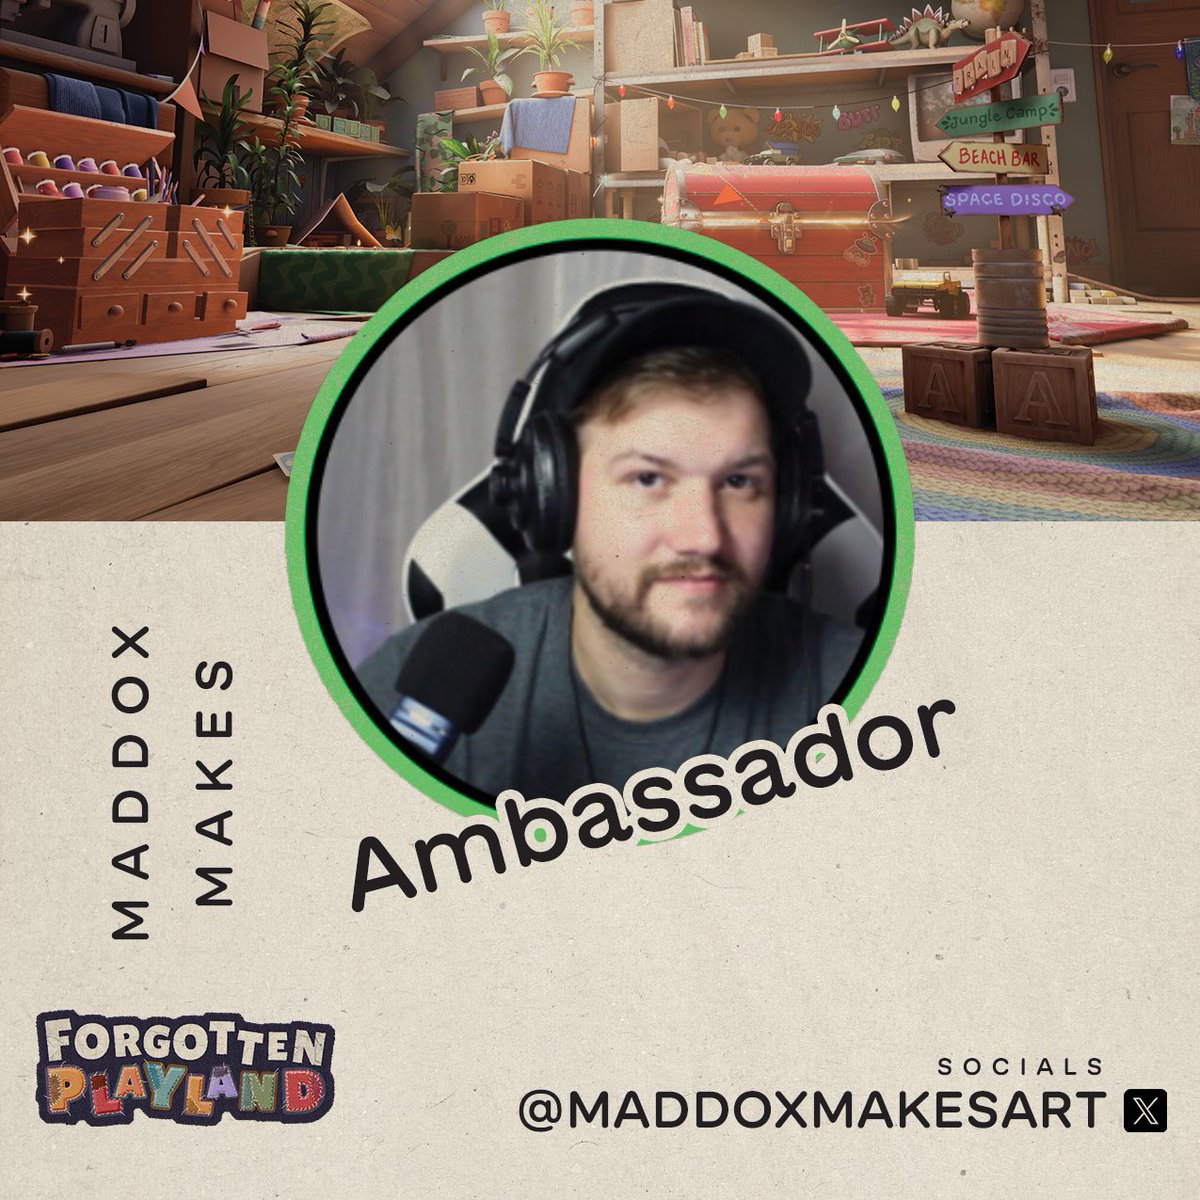 🌟 𝐍𝐄𝐖 𝐀𝐦𝐛𝐚𝐬𝐬𝐚𝐝𝐨𝐫: 𝐌𝐚𝐝𝐝𝐨𝐱 𝐌𝐚𝐤𝐞𝐬 🌟

Rounding out the #FPDreamTeam is the one and only @maddoxmakesart!

Thrilled to announce the final member of the #FPDreamTeam - none other than @maddoxmakesart! 🌟 He's 'kind of' a big deal - and we're feeling lucky to…